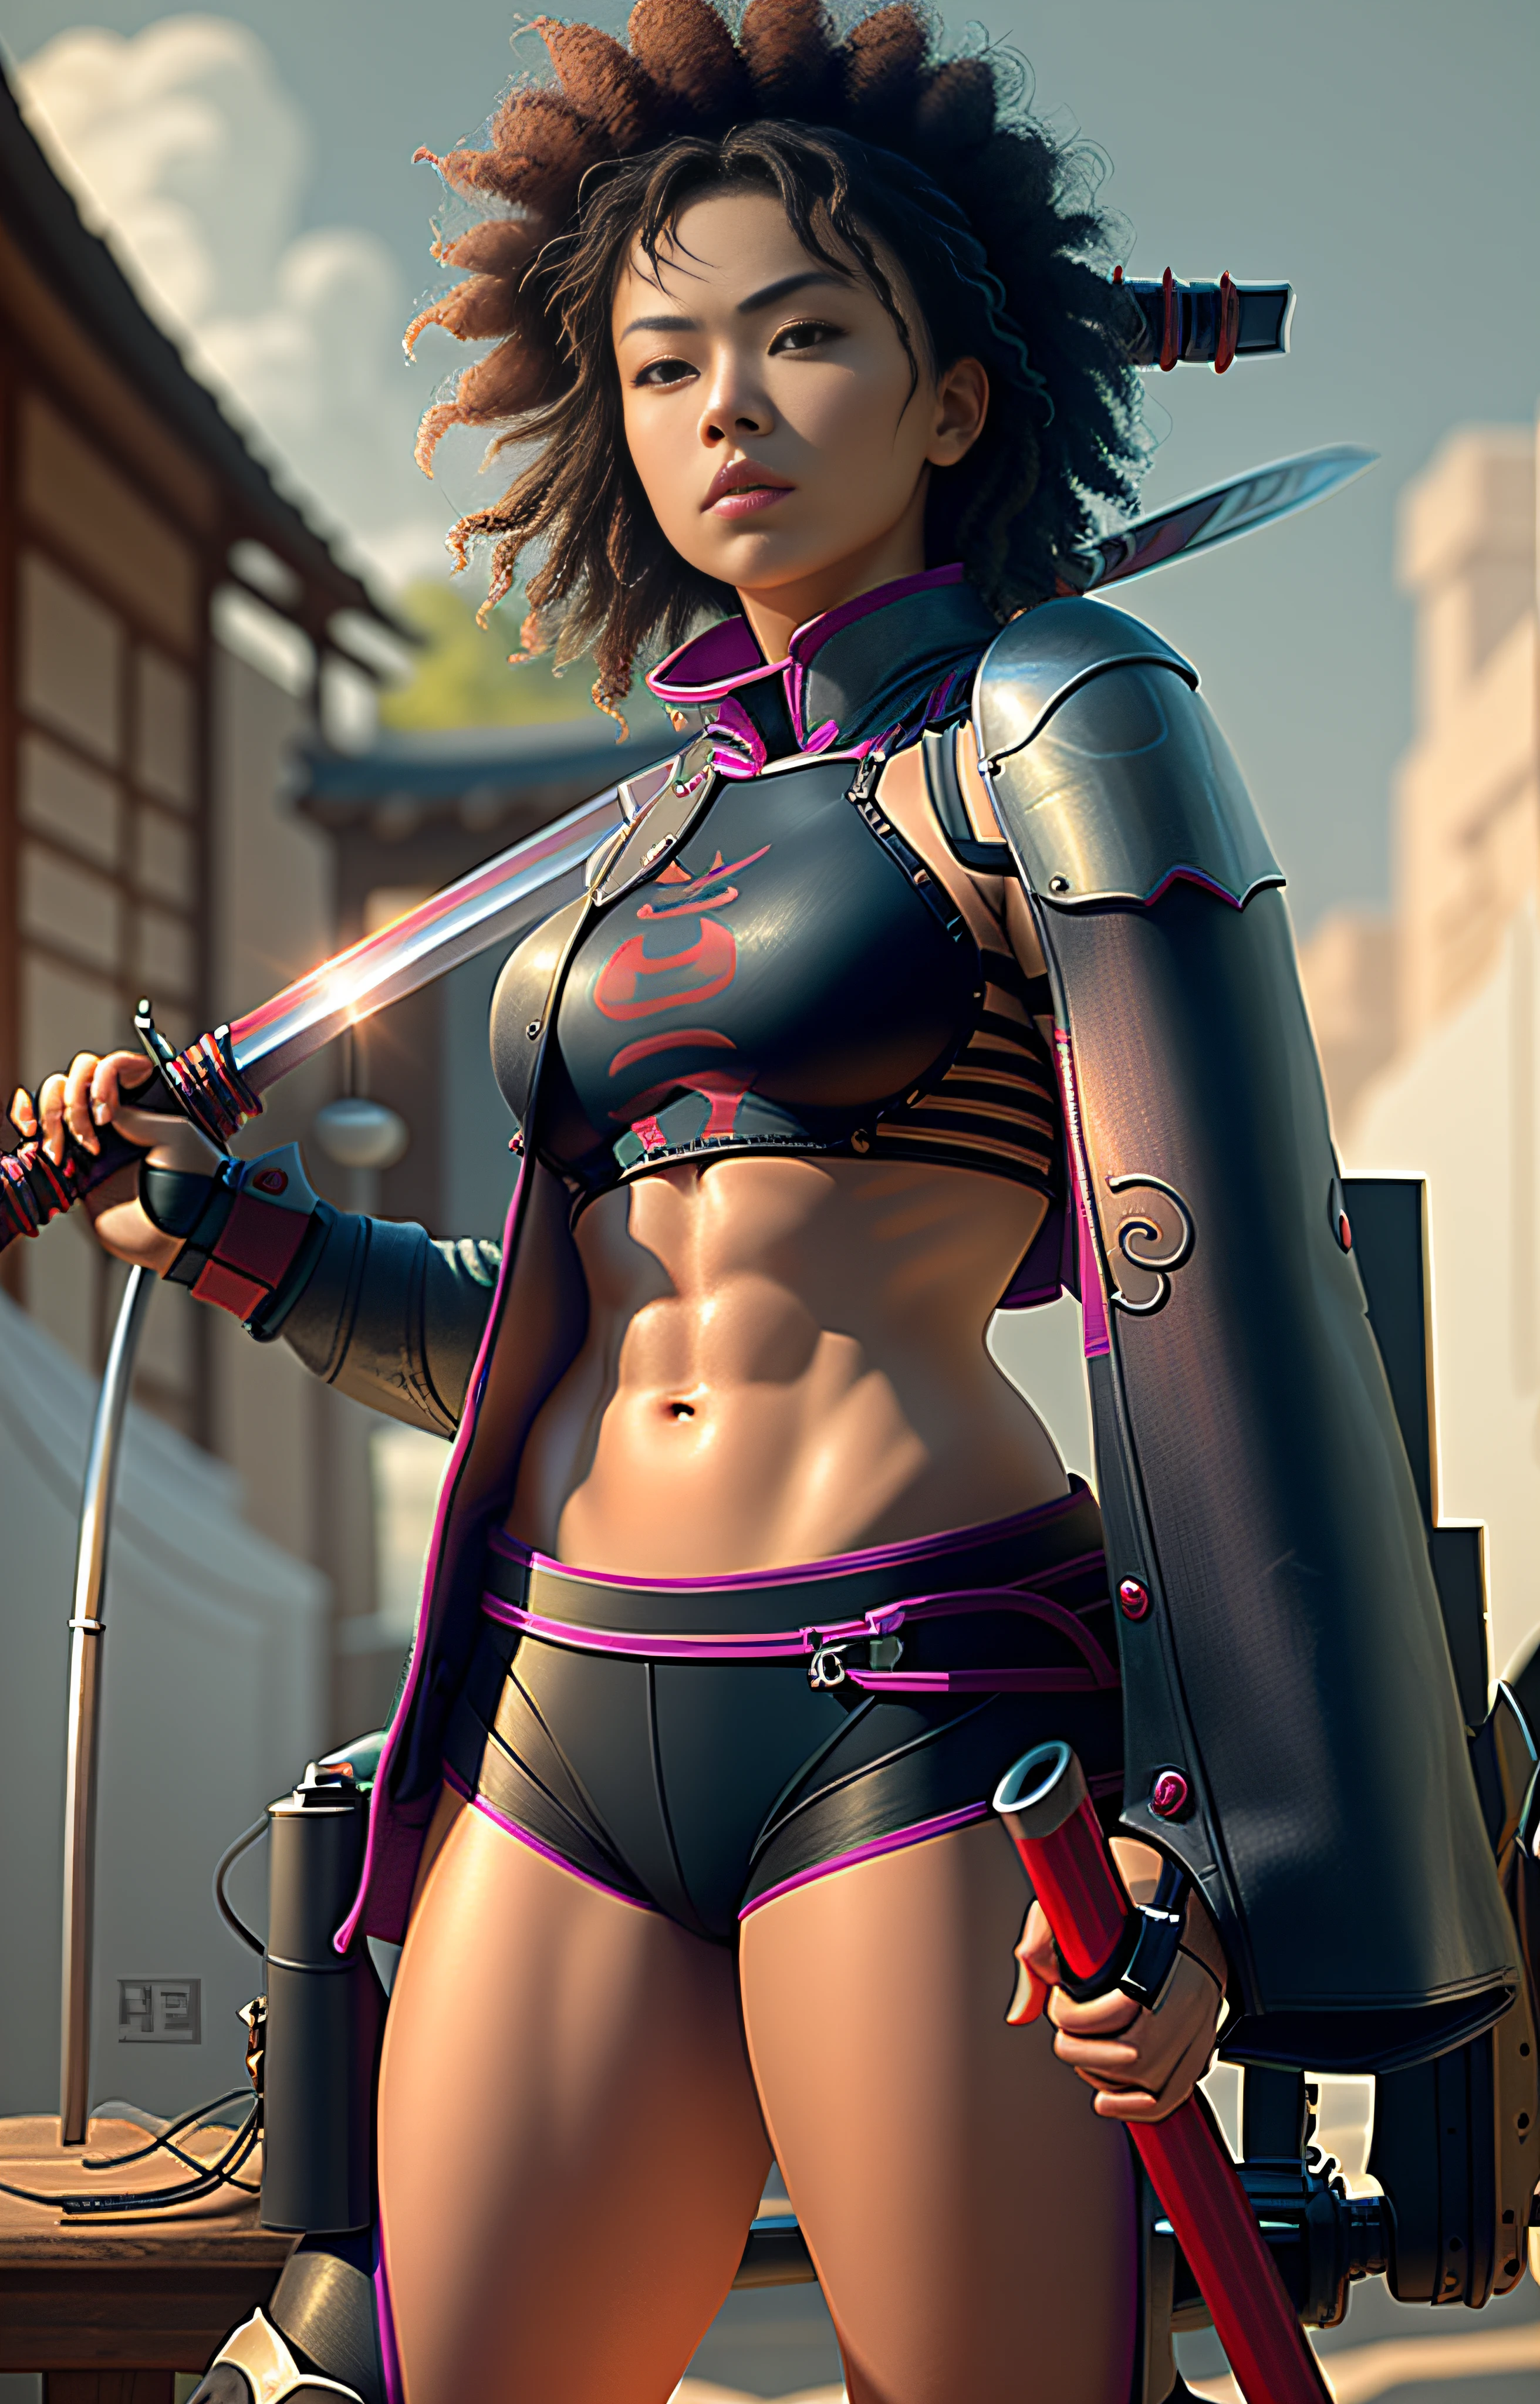 ((best quality)), ((masterpiece)), ((realistic)), ((detailed)), ((4k resolution, ultra-realistic, very detailed, incredibly detailed, absurd, HDR)), there is a woman of black bikini and jacket holding a sword, handsome samurai with afro, samurai with afro, katana, pose, she is holding a katana sword, she is ready to fight, muscular warrior women, warrior body, female samurai unsheathing her katana, profile picture, strong woman, posing ready for a fight, fit girl